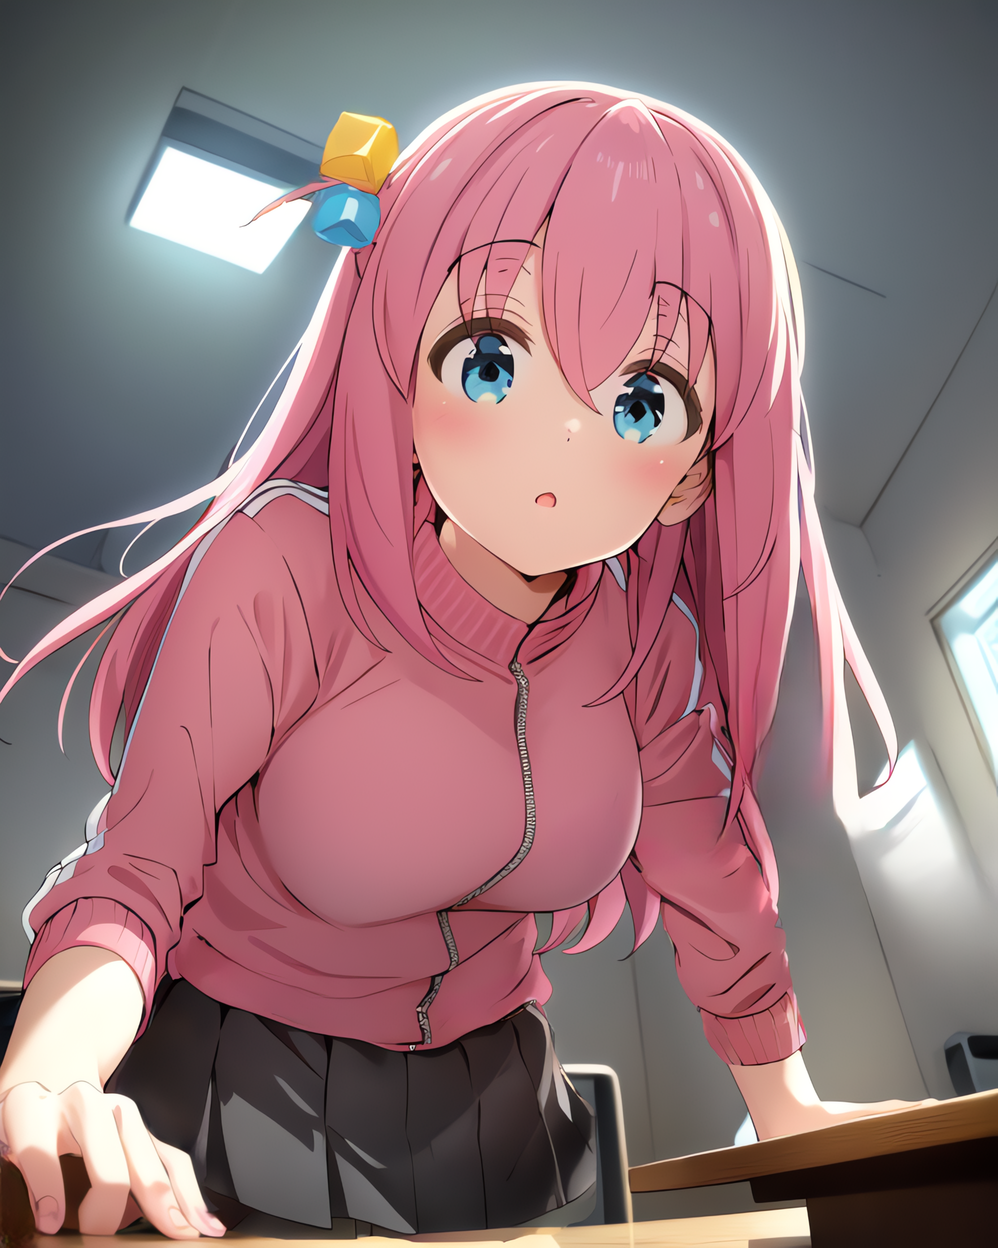 Premium AI Image  a cute anime character with a pink shirt that